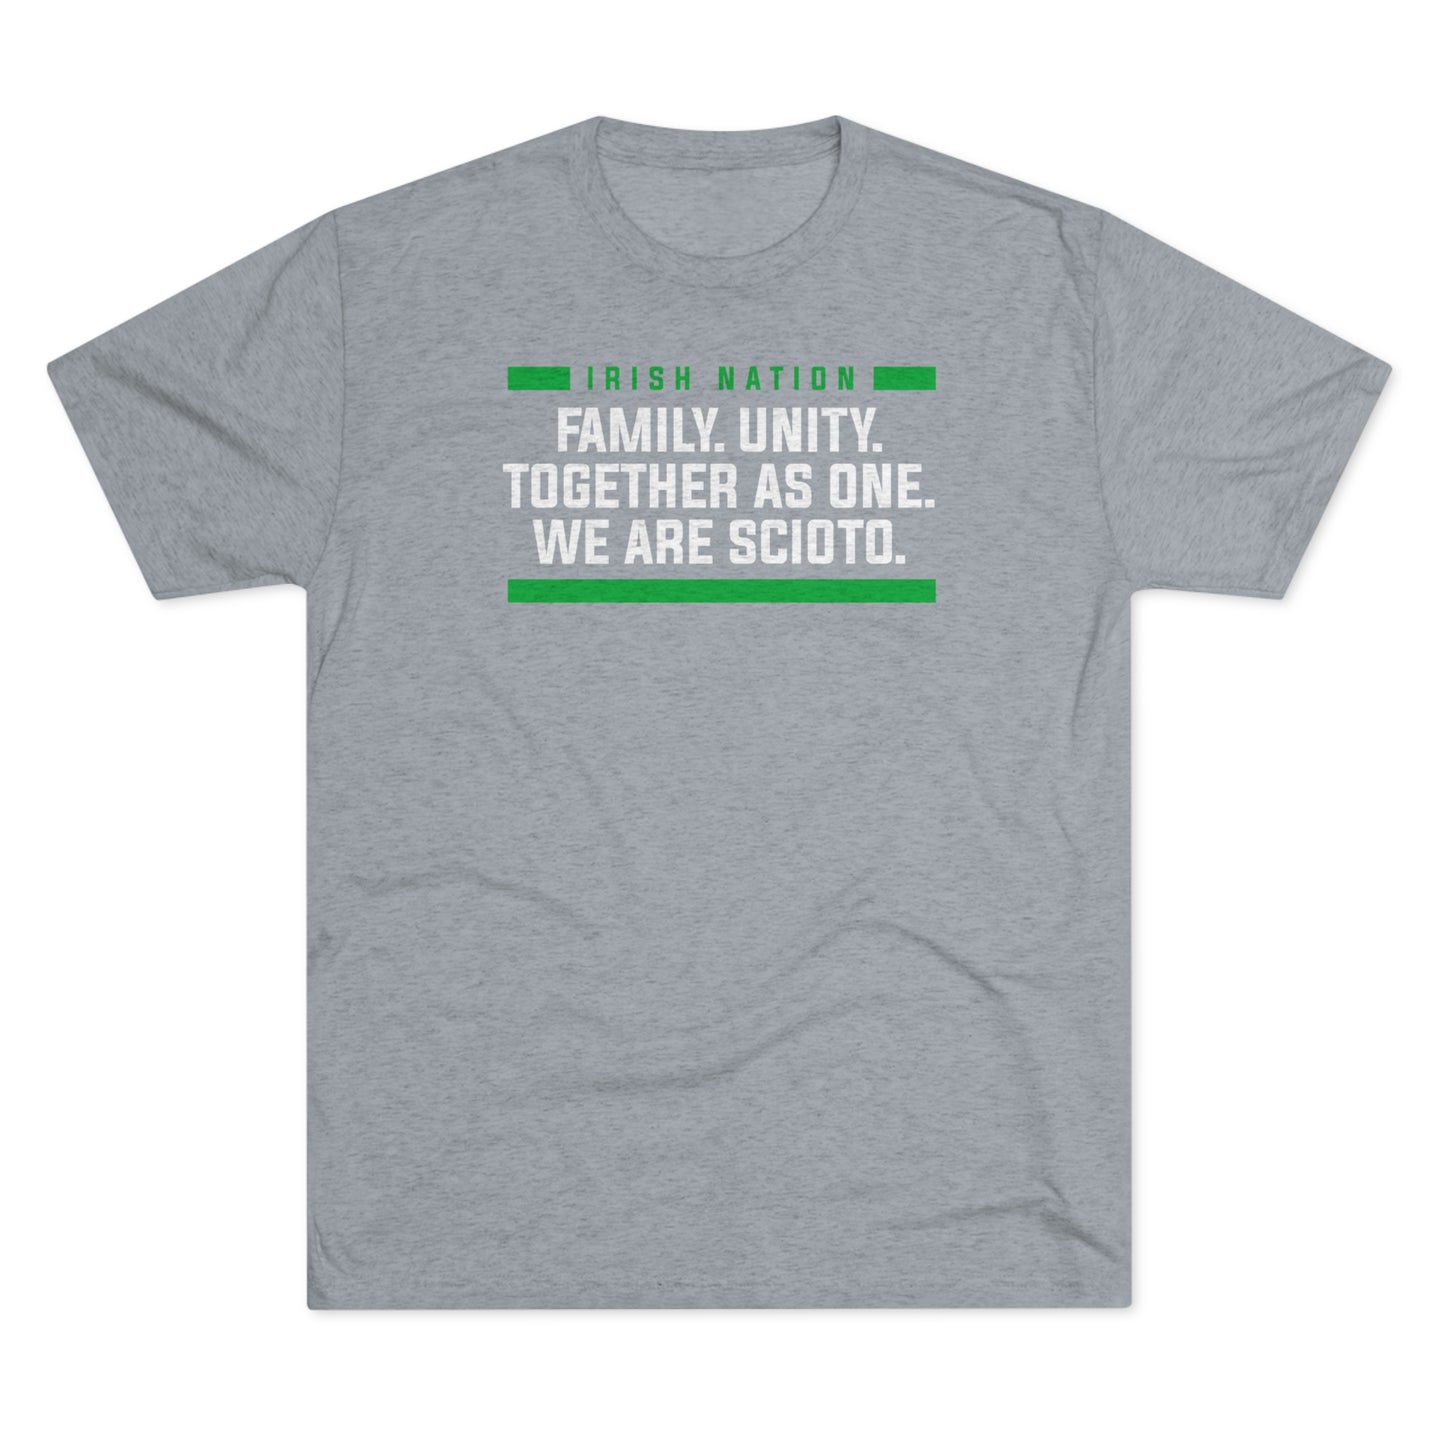 FAMILY. UNITY. TOGETHER AS ONE. WE ARE SCIOTO. Unisex Tri-Blend Crew Tee